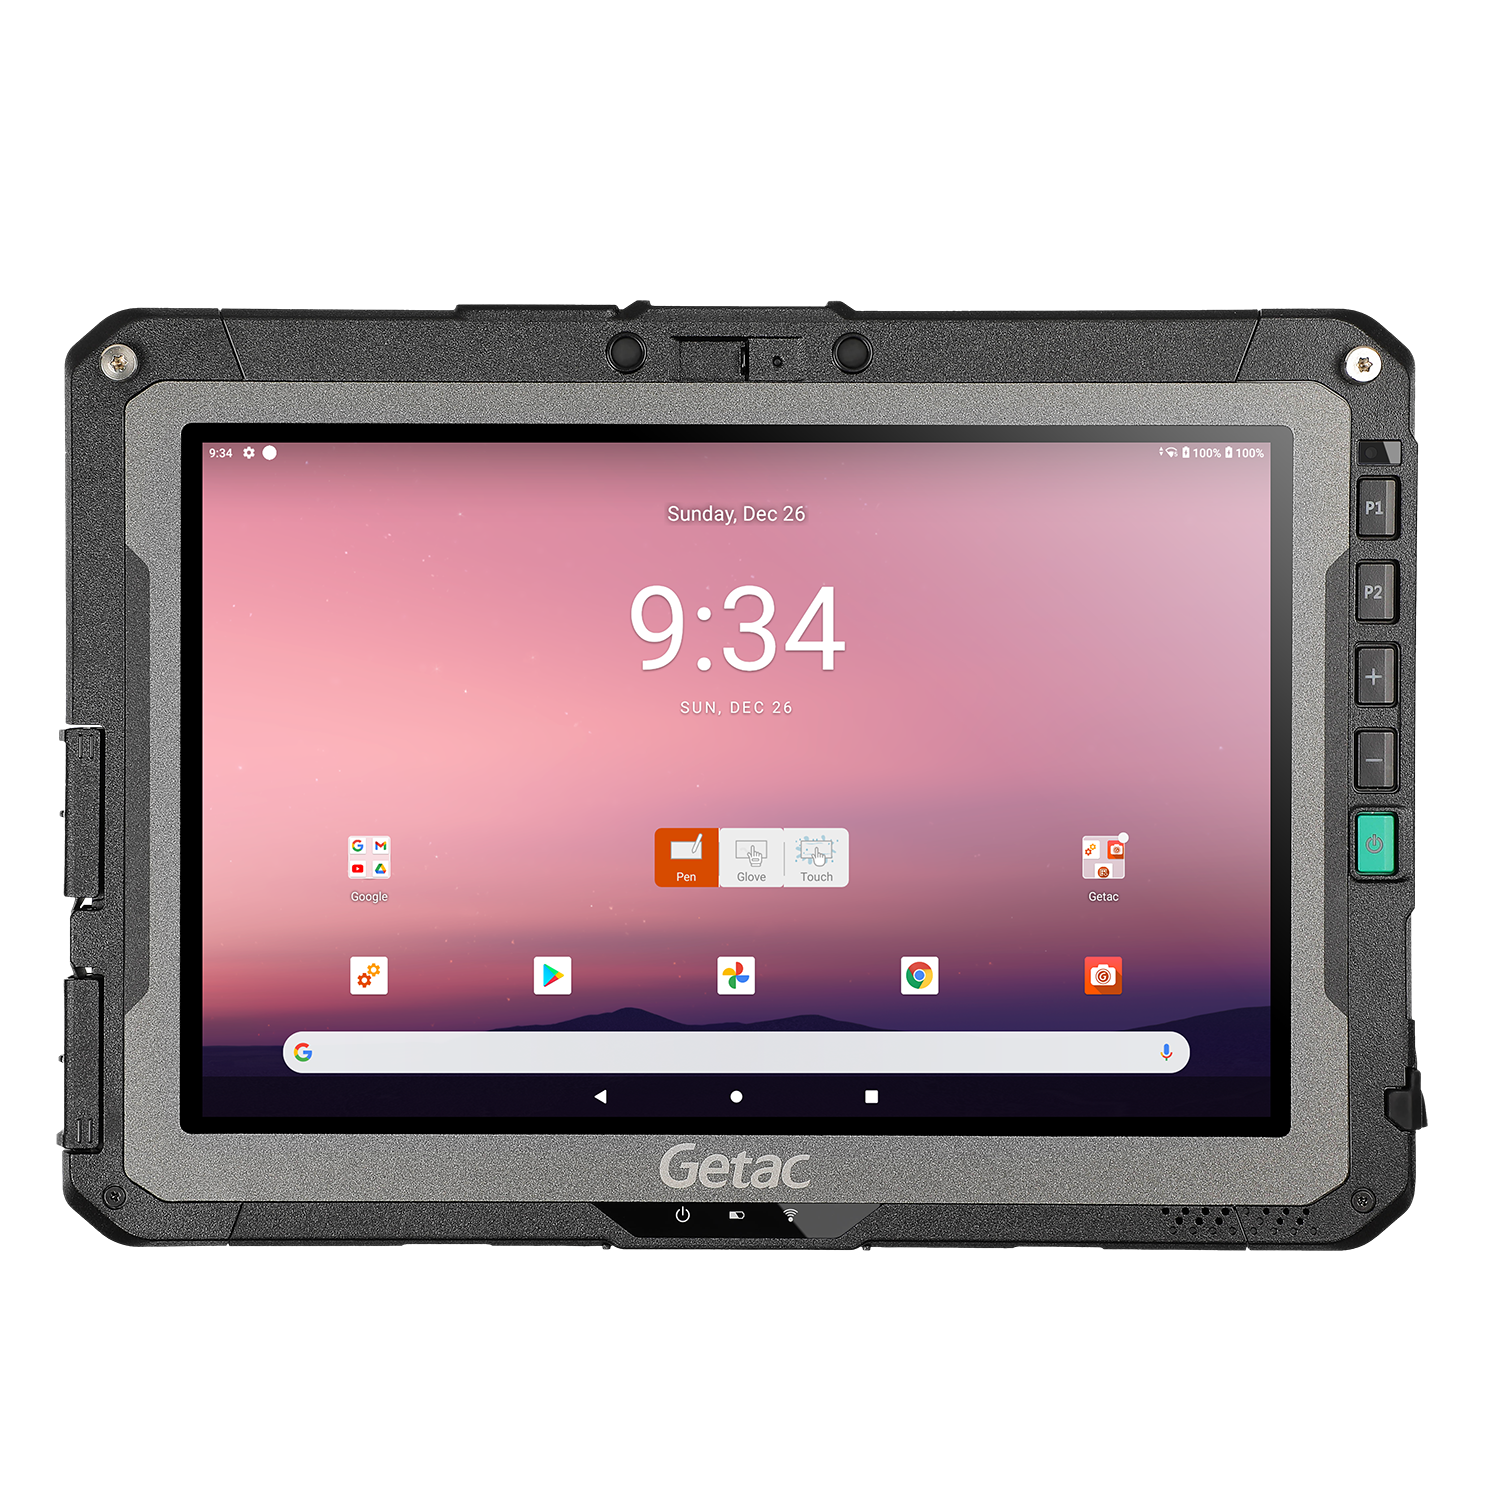 Getac ZX10 Fully Rugged Android Tablet on white background with operating system menu visible.